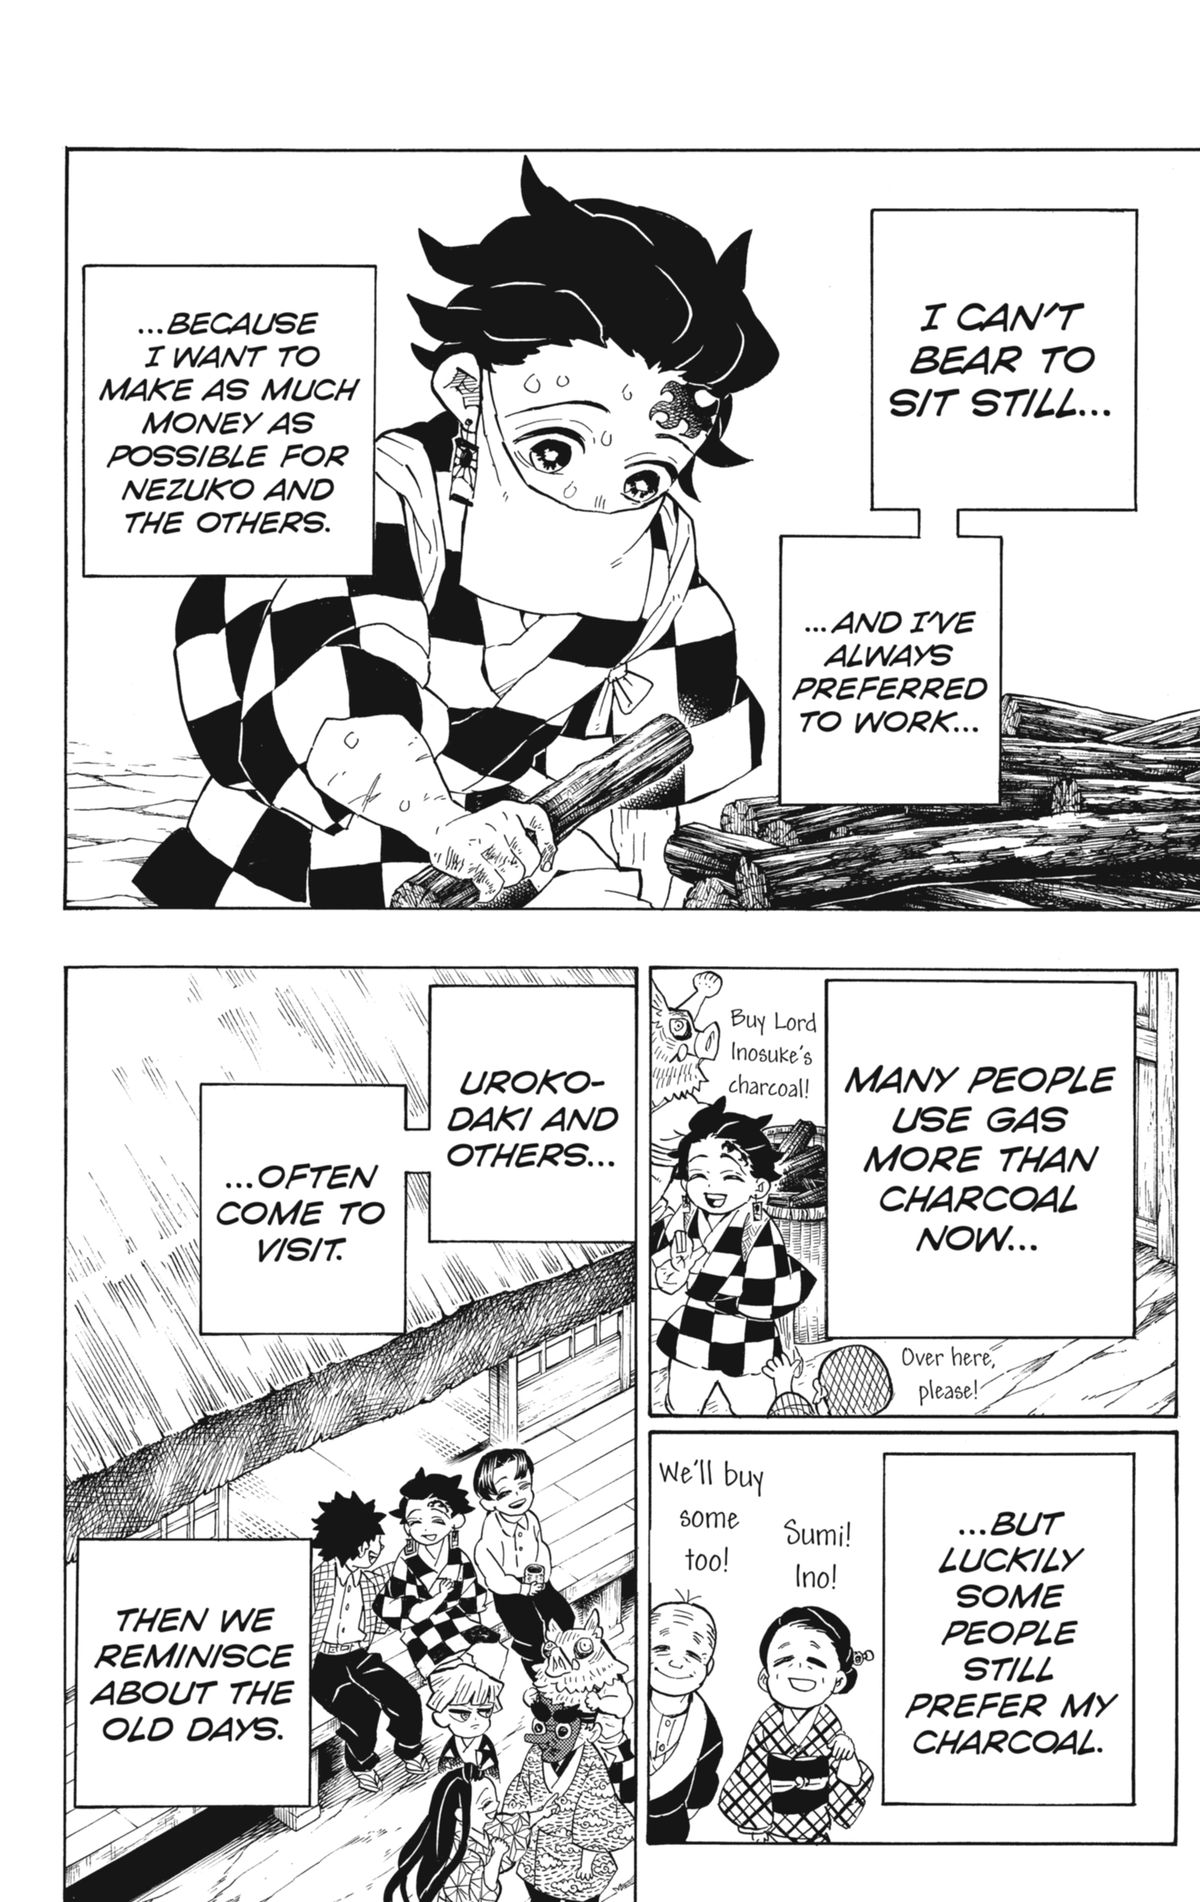 A page showing three manga panels. The top one shows Tanjiro working with the text: I can’t bear to sit still and I’ve always preferred to work because I want to make as much money as possible for Nezuko and the others. Below re three panels show character hanging out and say: Many people use gas more than charcoal now but luckily some people still prefer my charcoal. Uroko-Daki and other often come to visit. Then we reminisce about the old days.